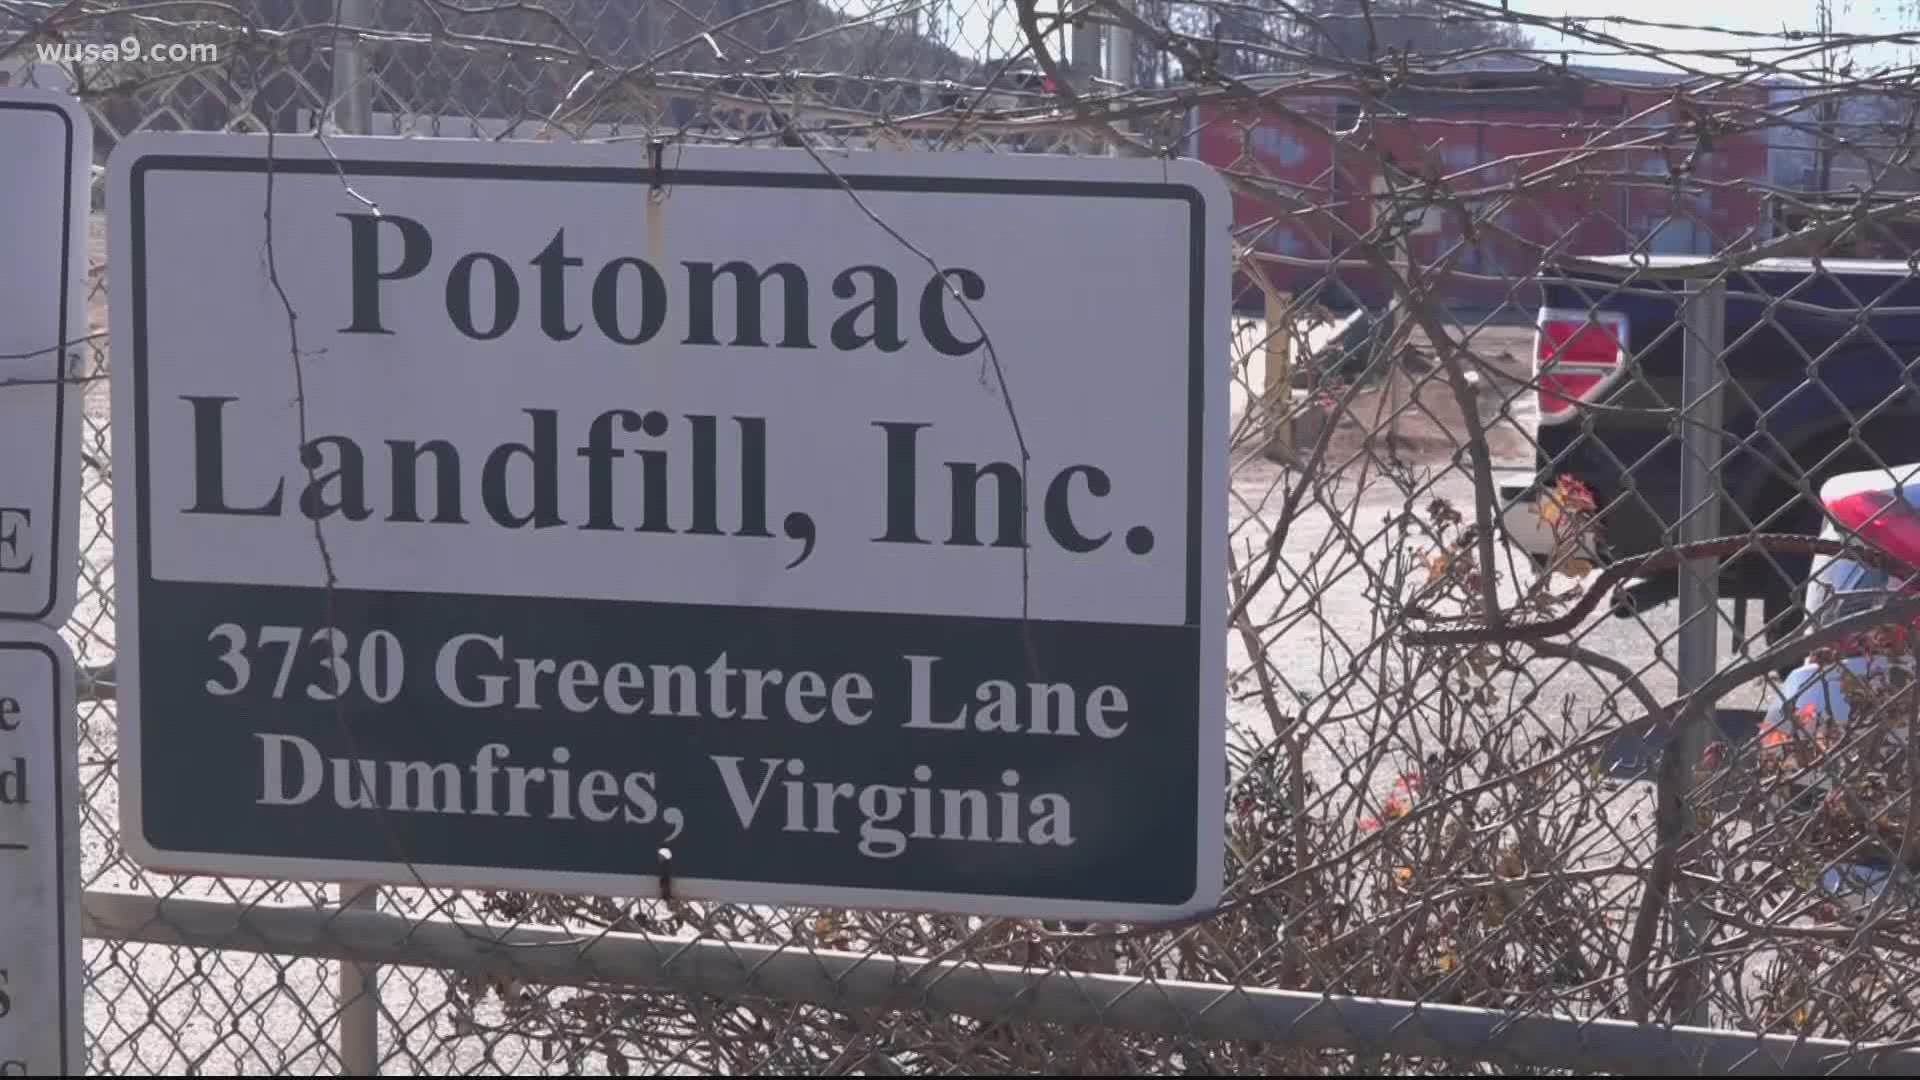 After 37 years, the Potomac Landfill Site that has grown to mountainous proportions will be replaced by a casino and park.